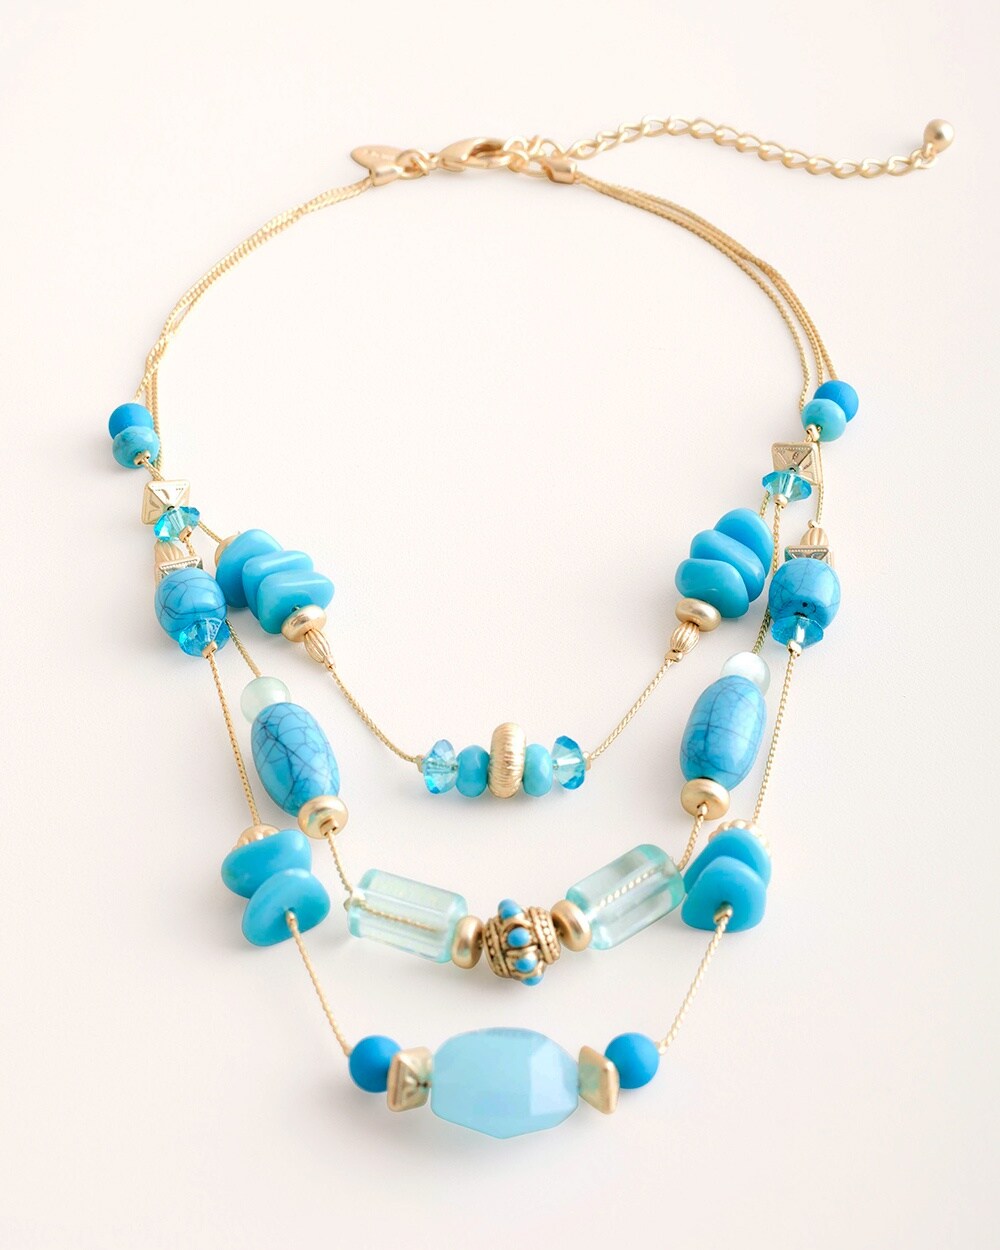 Turquoise-Hued Illusion Necklace